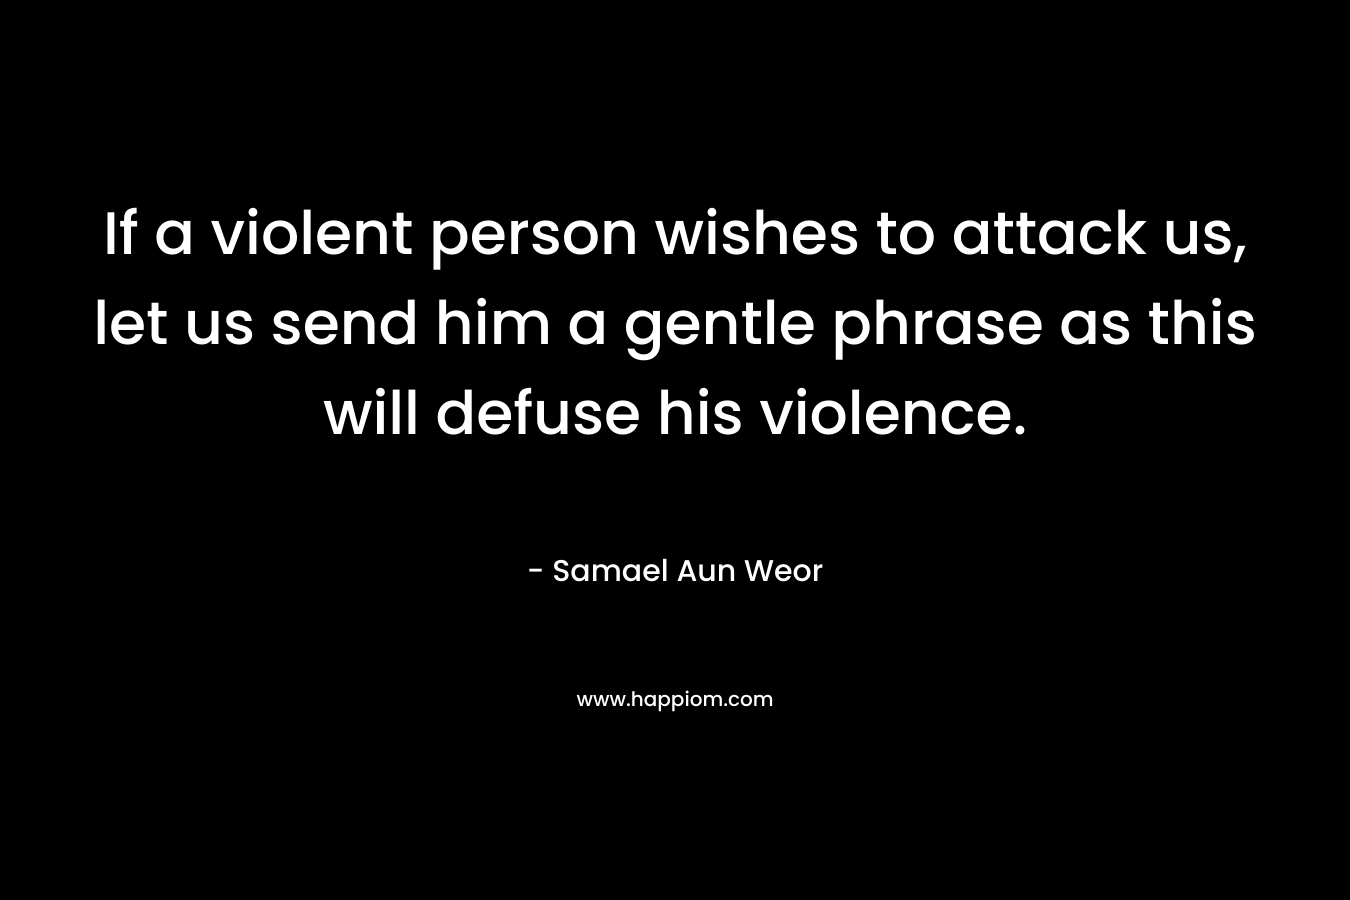 If a violent person wishes to attack us, let us send him a gentle phrase as this will defuse his violence. – Samael Aun Weor